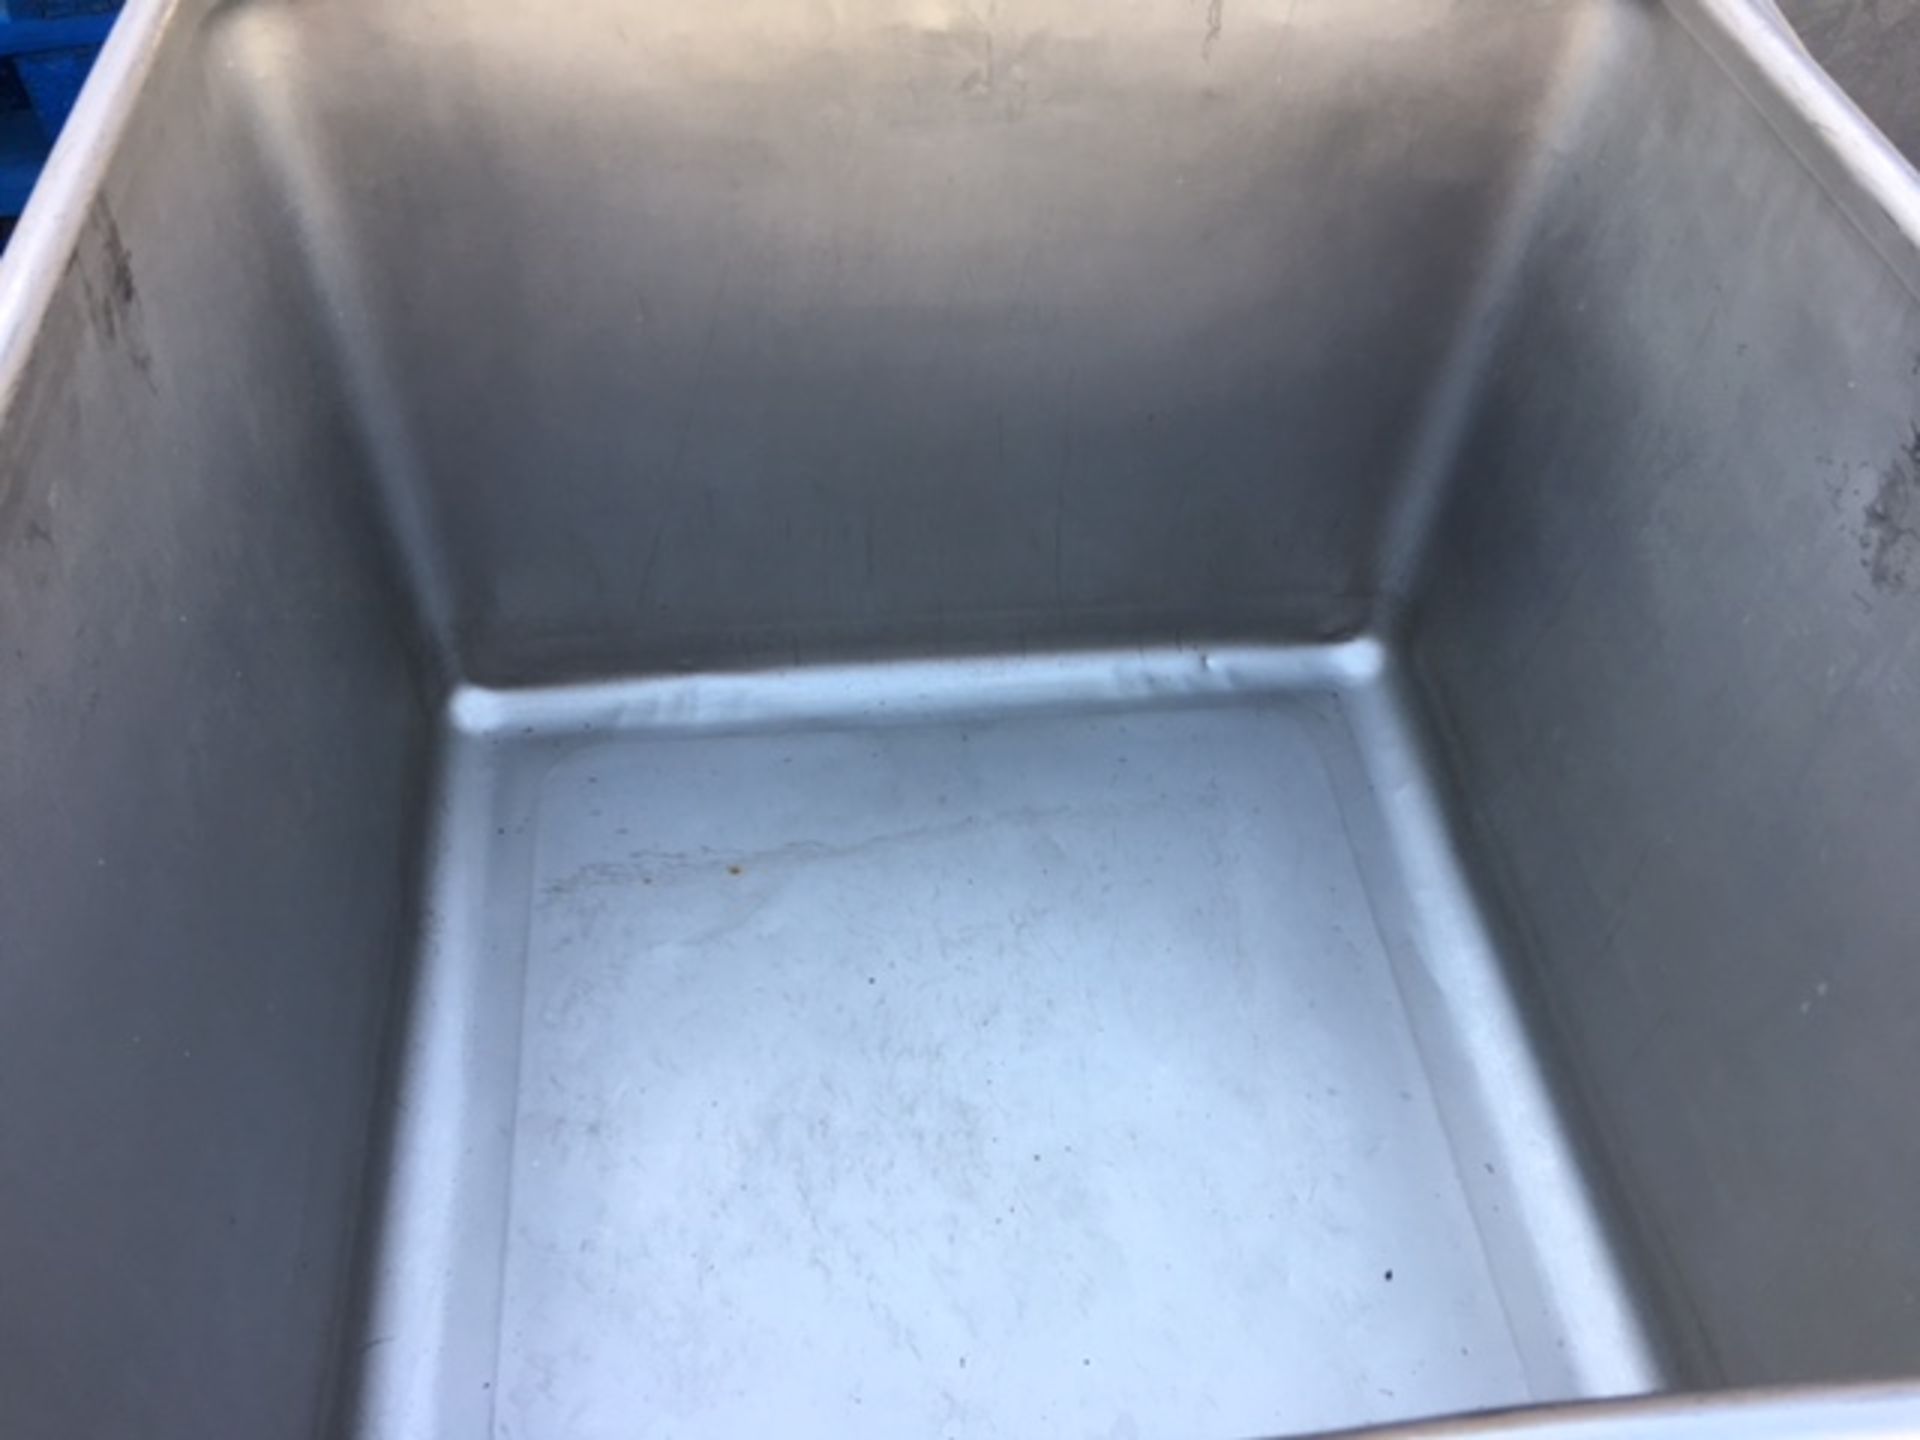 2 X 200 Litre Used Tote Bins - Image 2 of 2